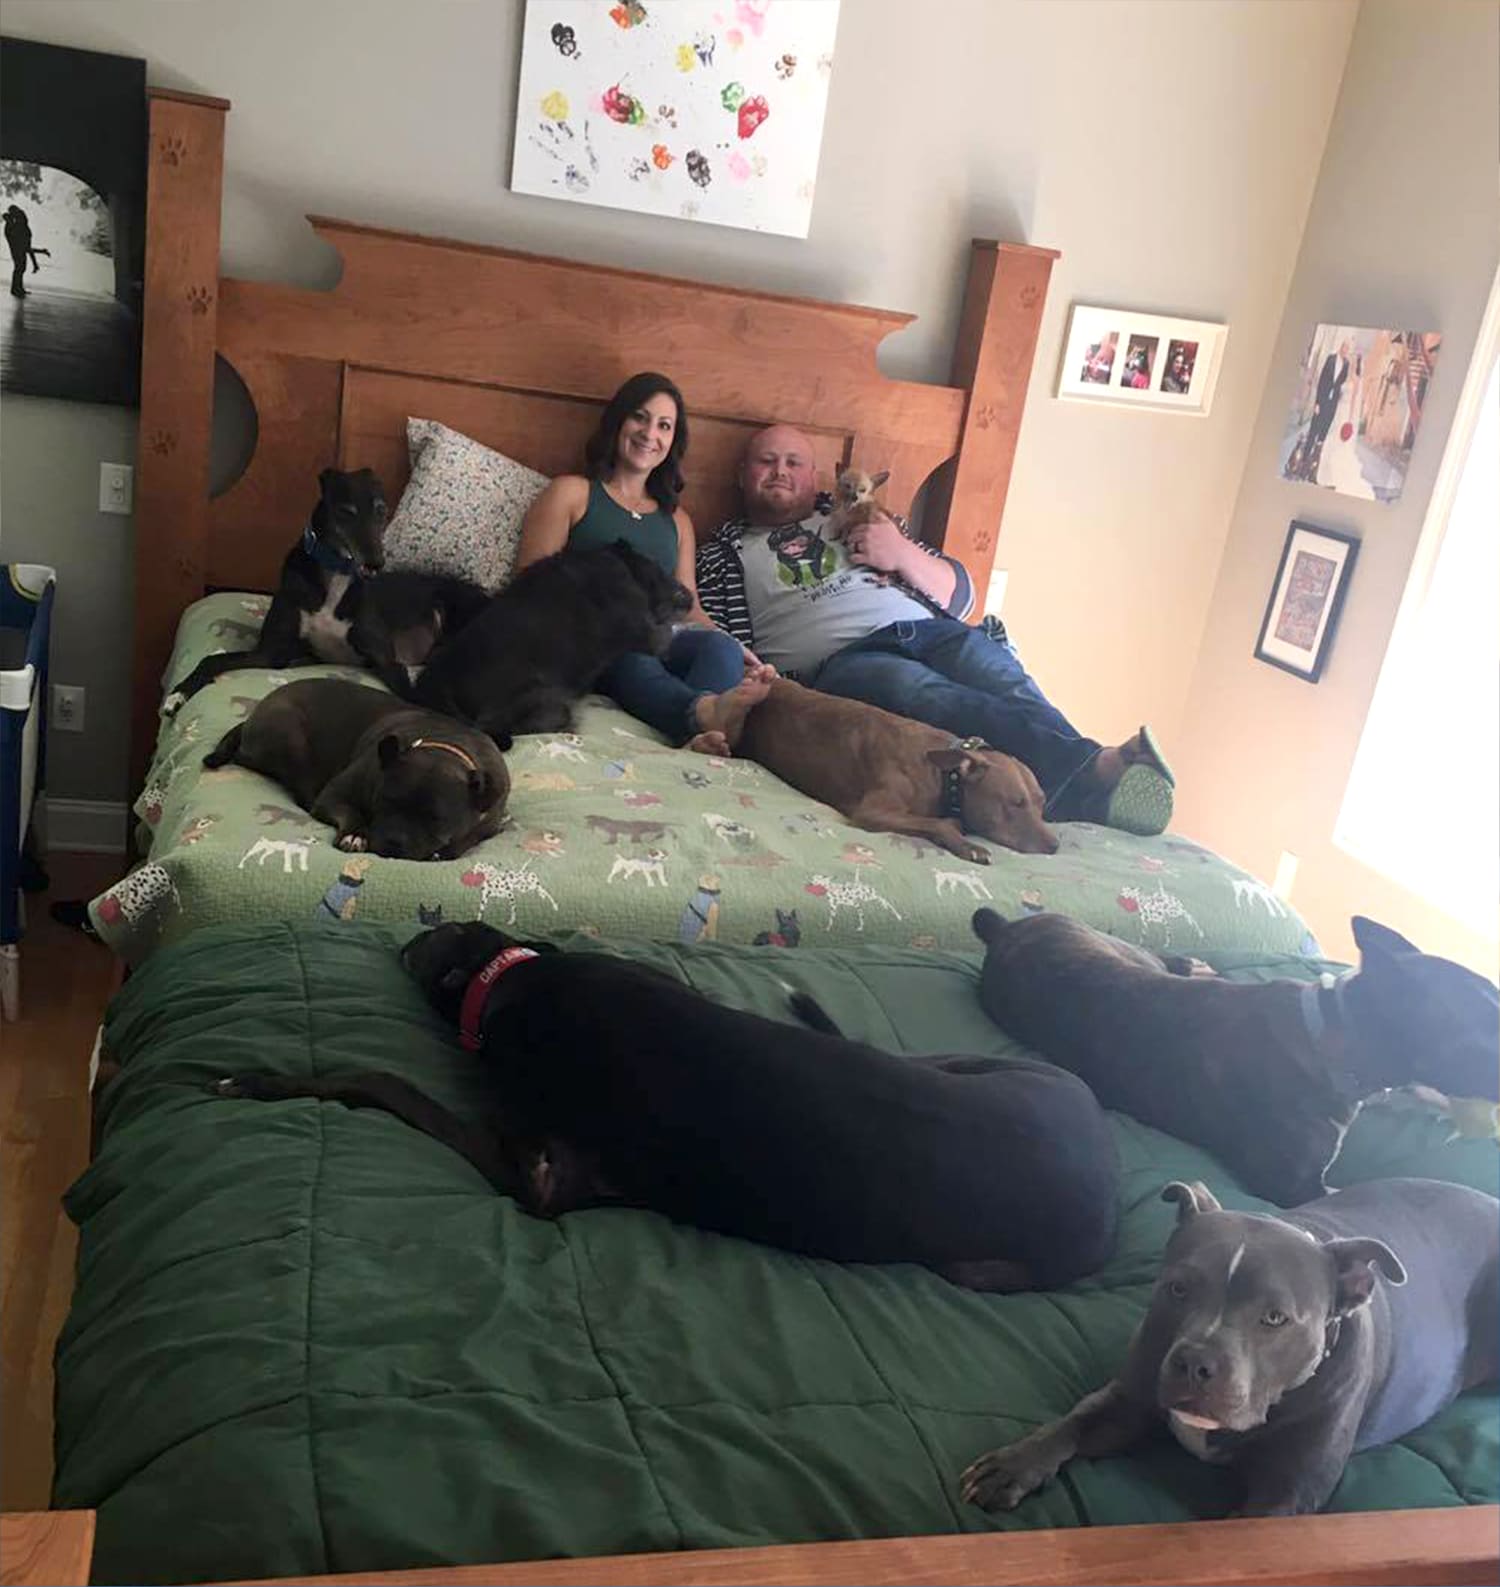 Giant Bed To Sleep Comfortably With 8 Dogs, King Size Bed With Dog Attached